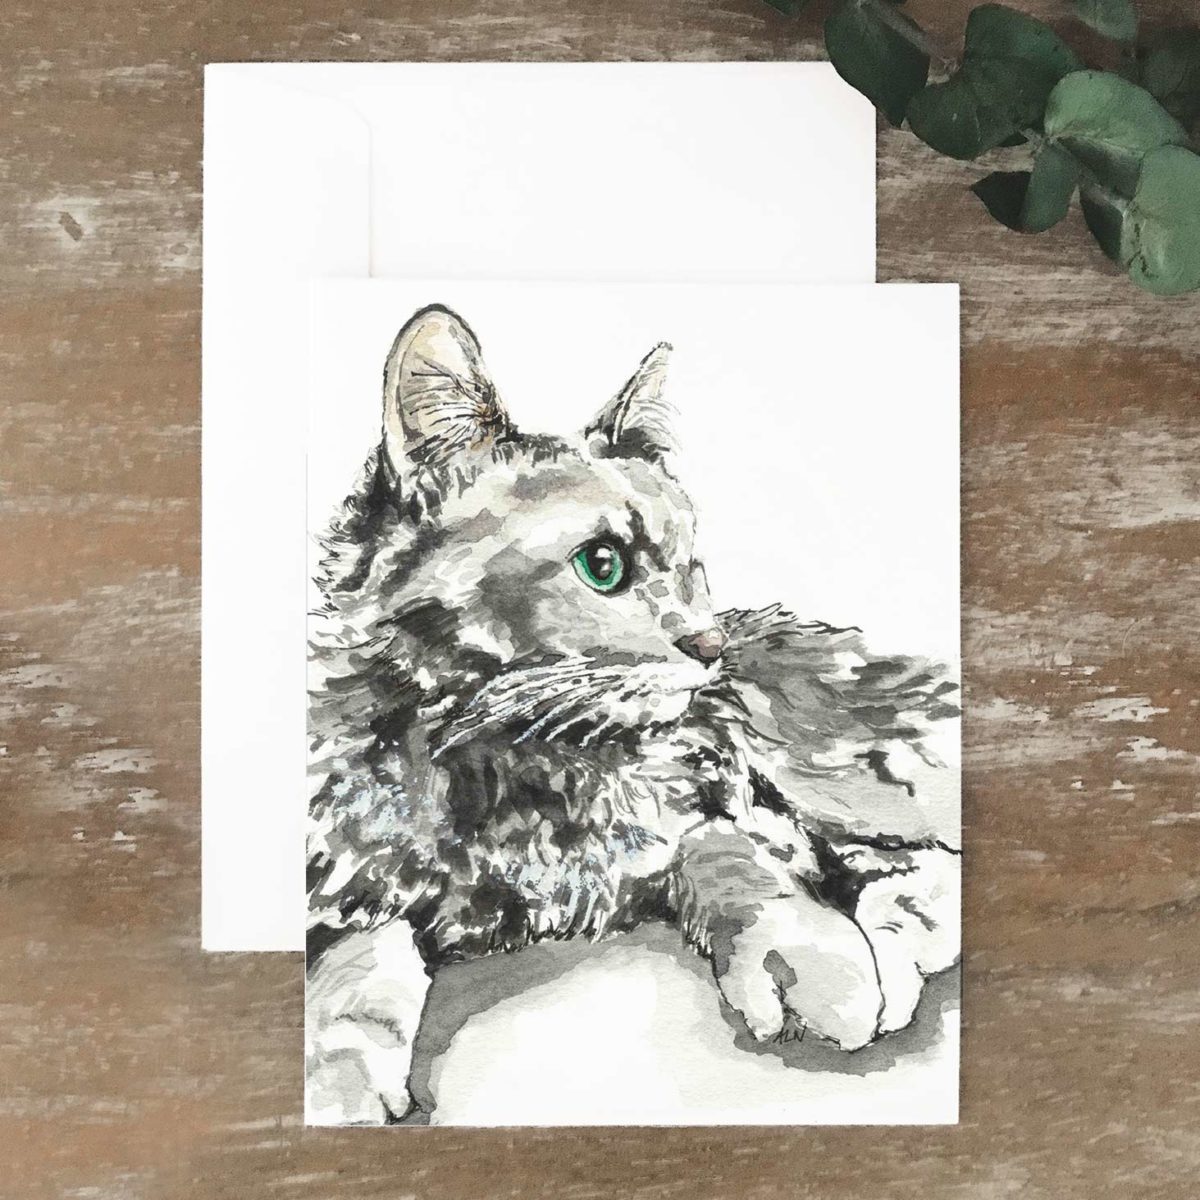 A2 greeting card of a gray and white cat with green eyes